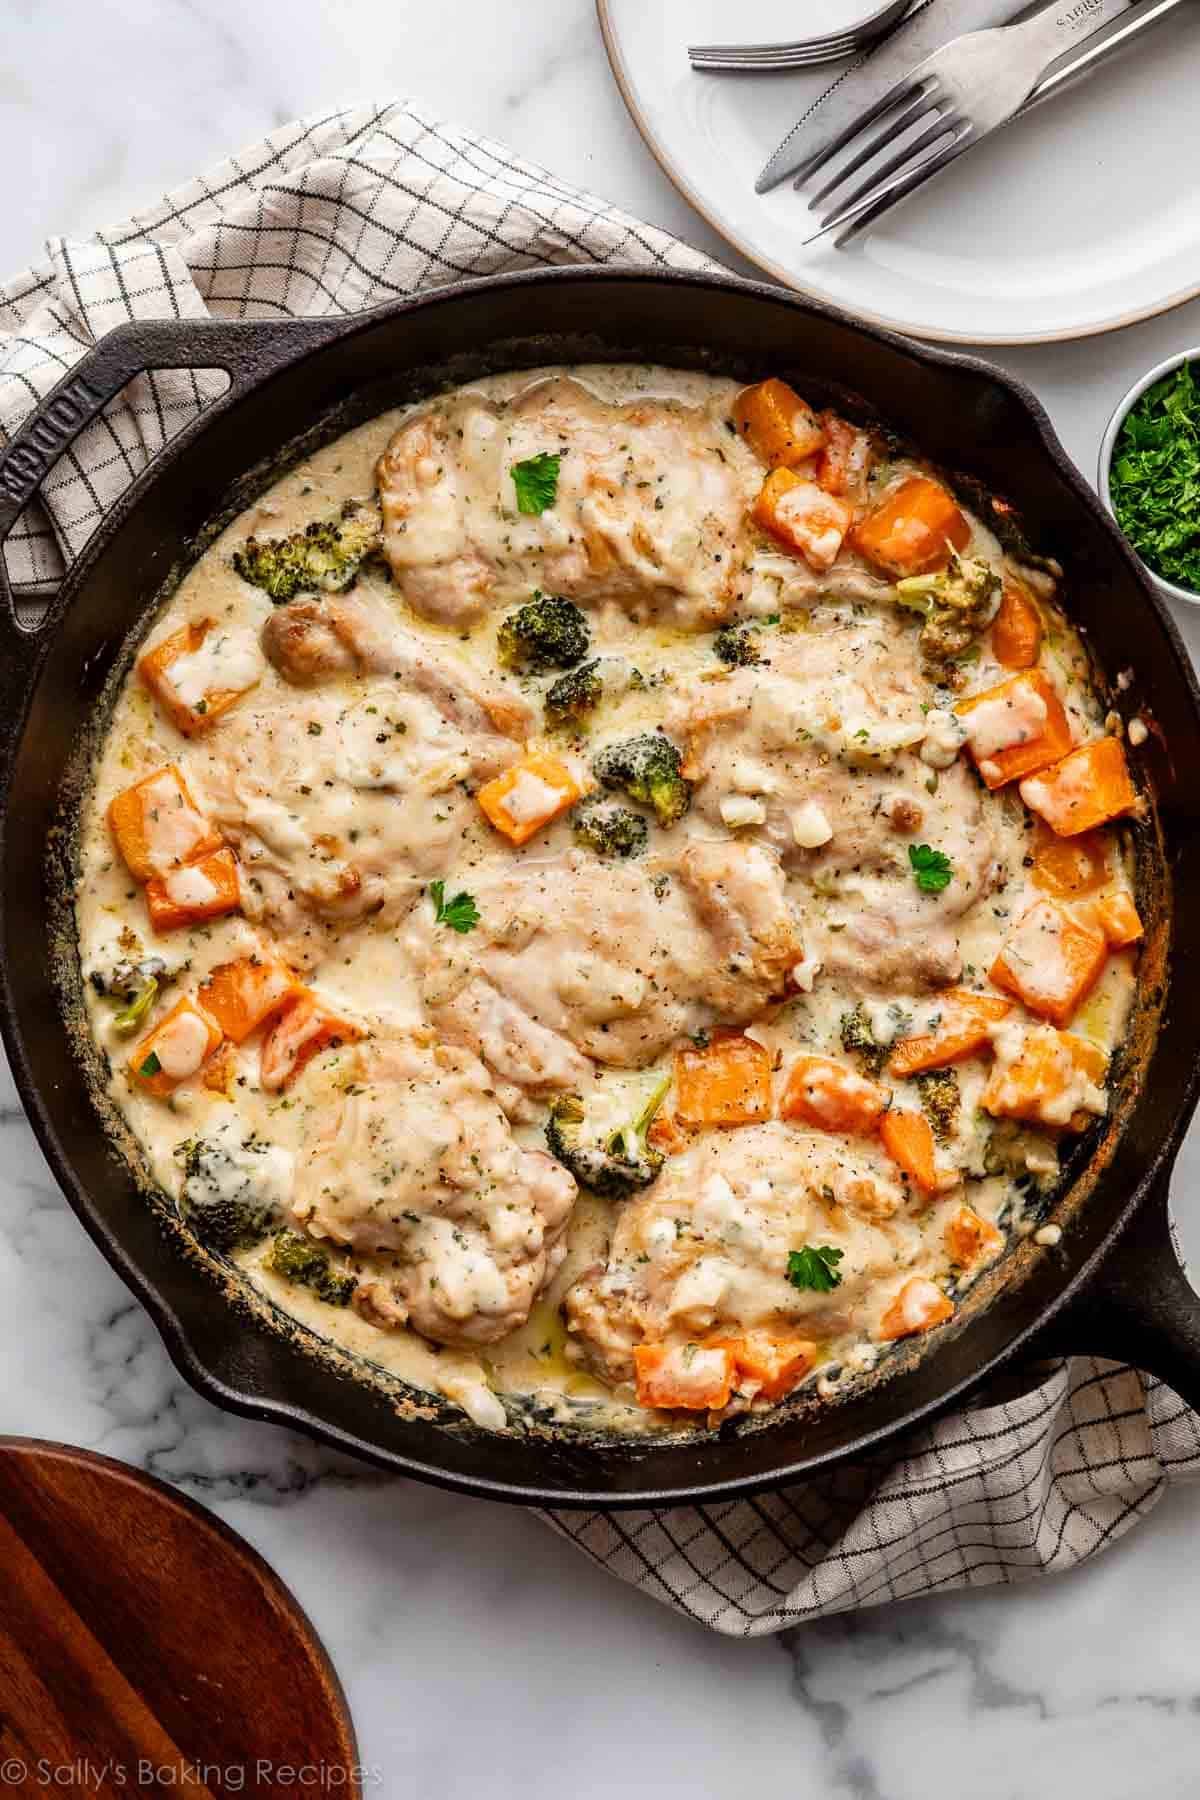 cooked chicken and vegetables in a creamy garlic sauce in a black cast iron skillet.